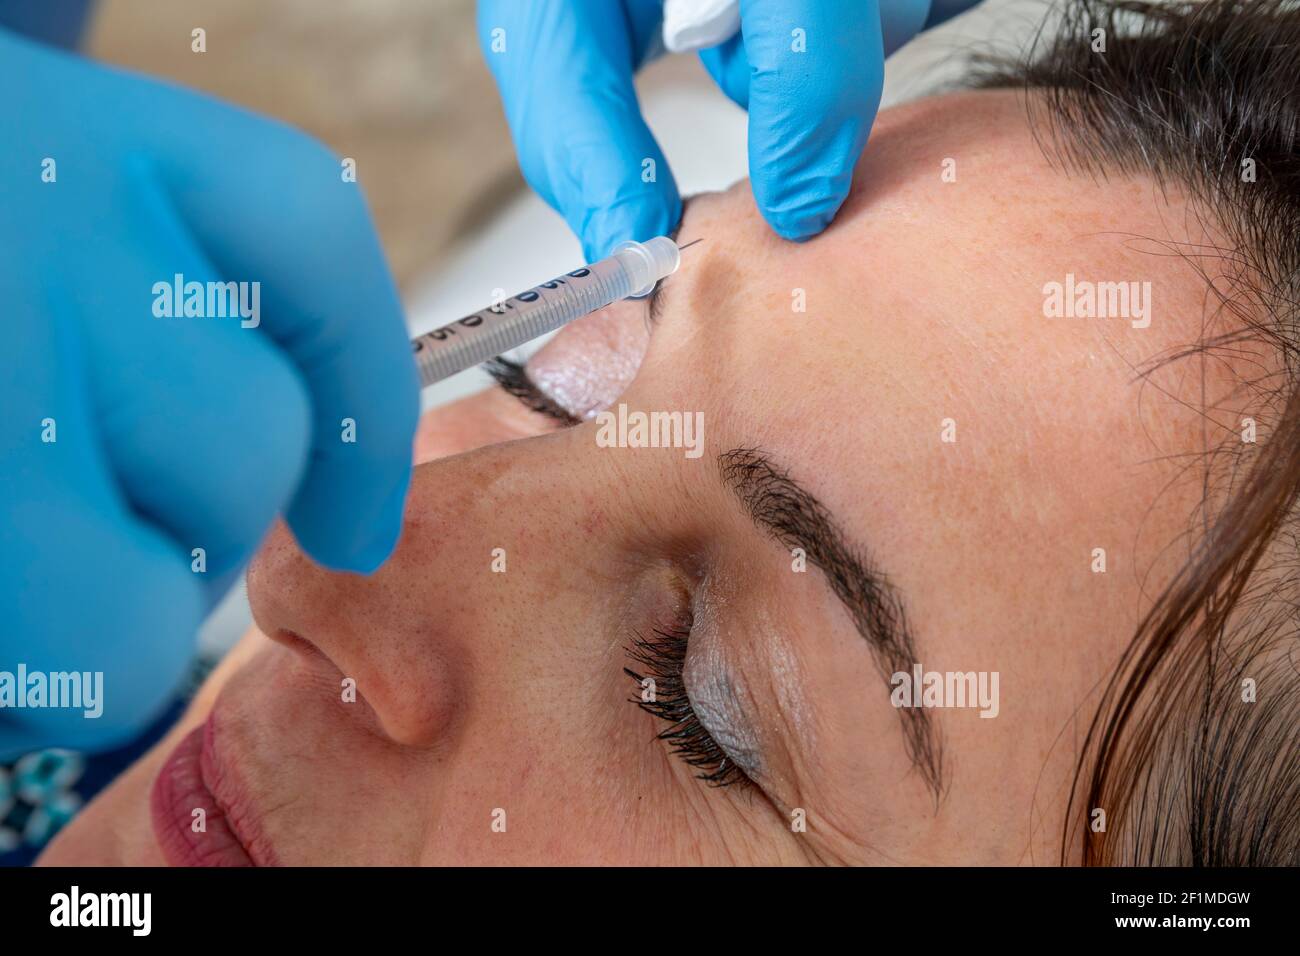 Anti aging, rejuvenating facial treatment concept: Dermatological expert injects liquid anti wrinkle treatment. Professional cure to mid age woman. Stock Photo